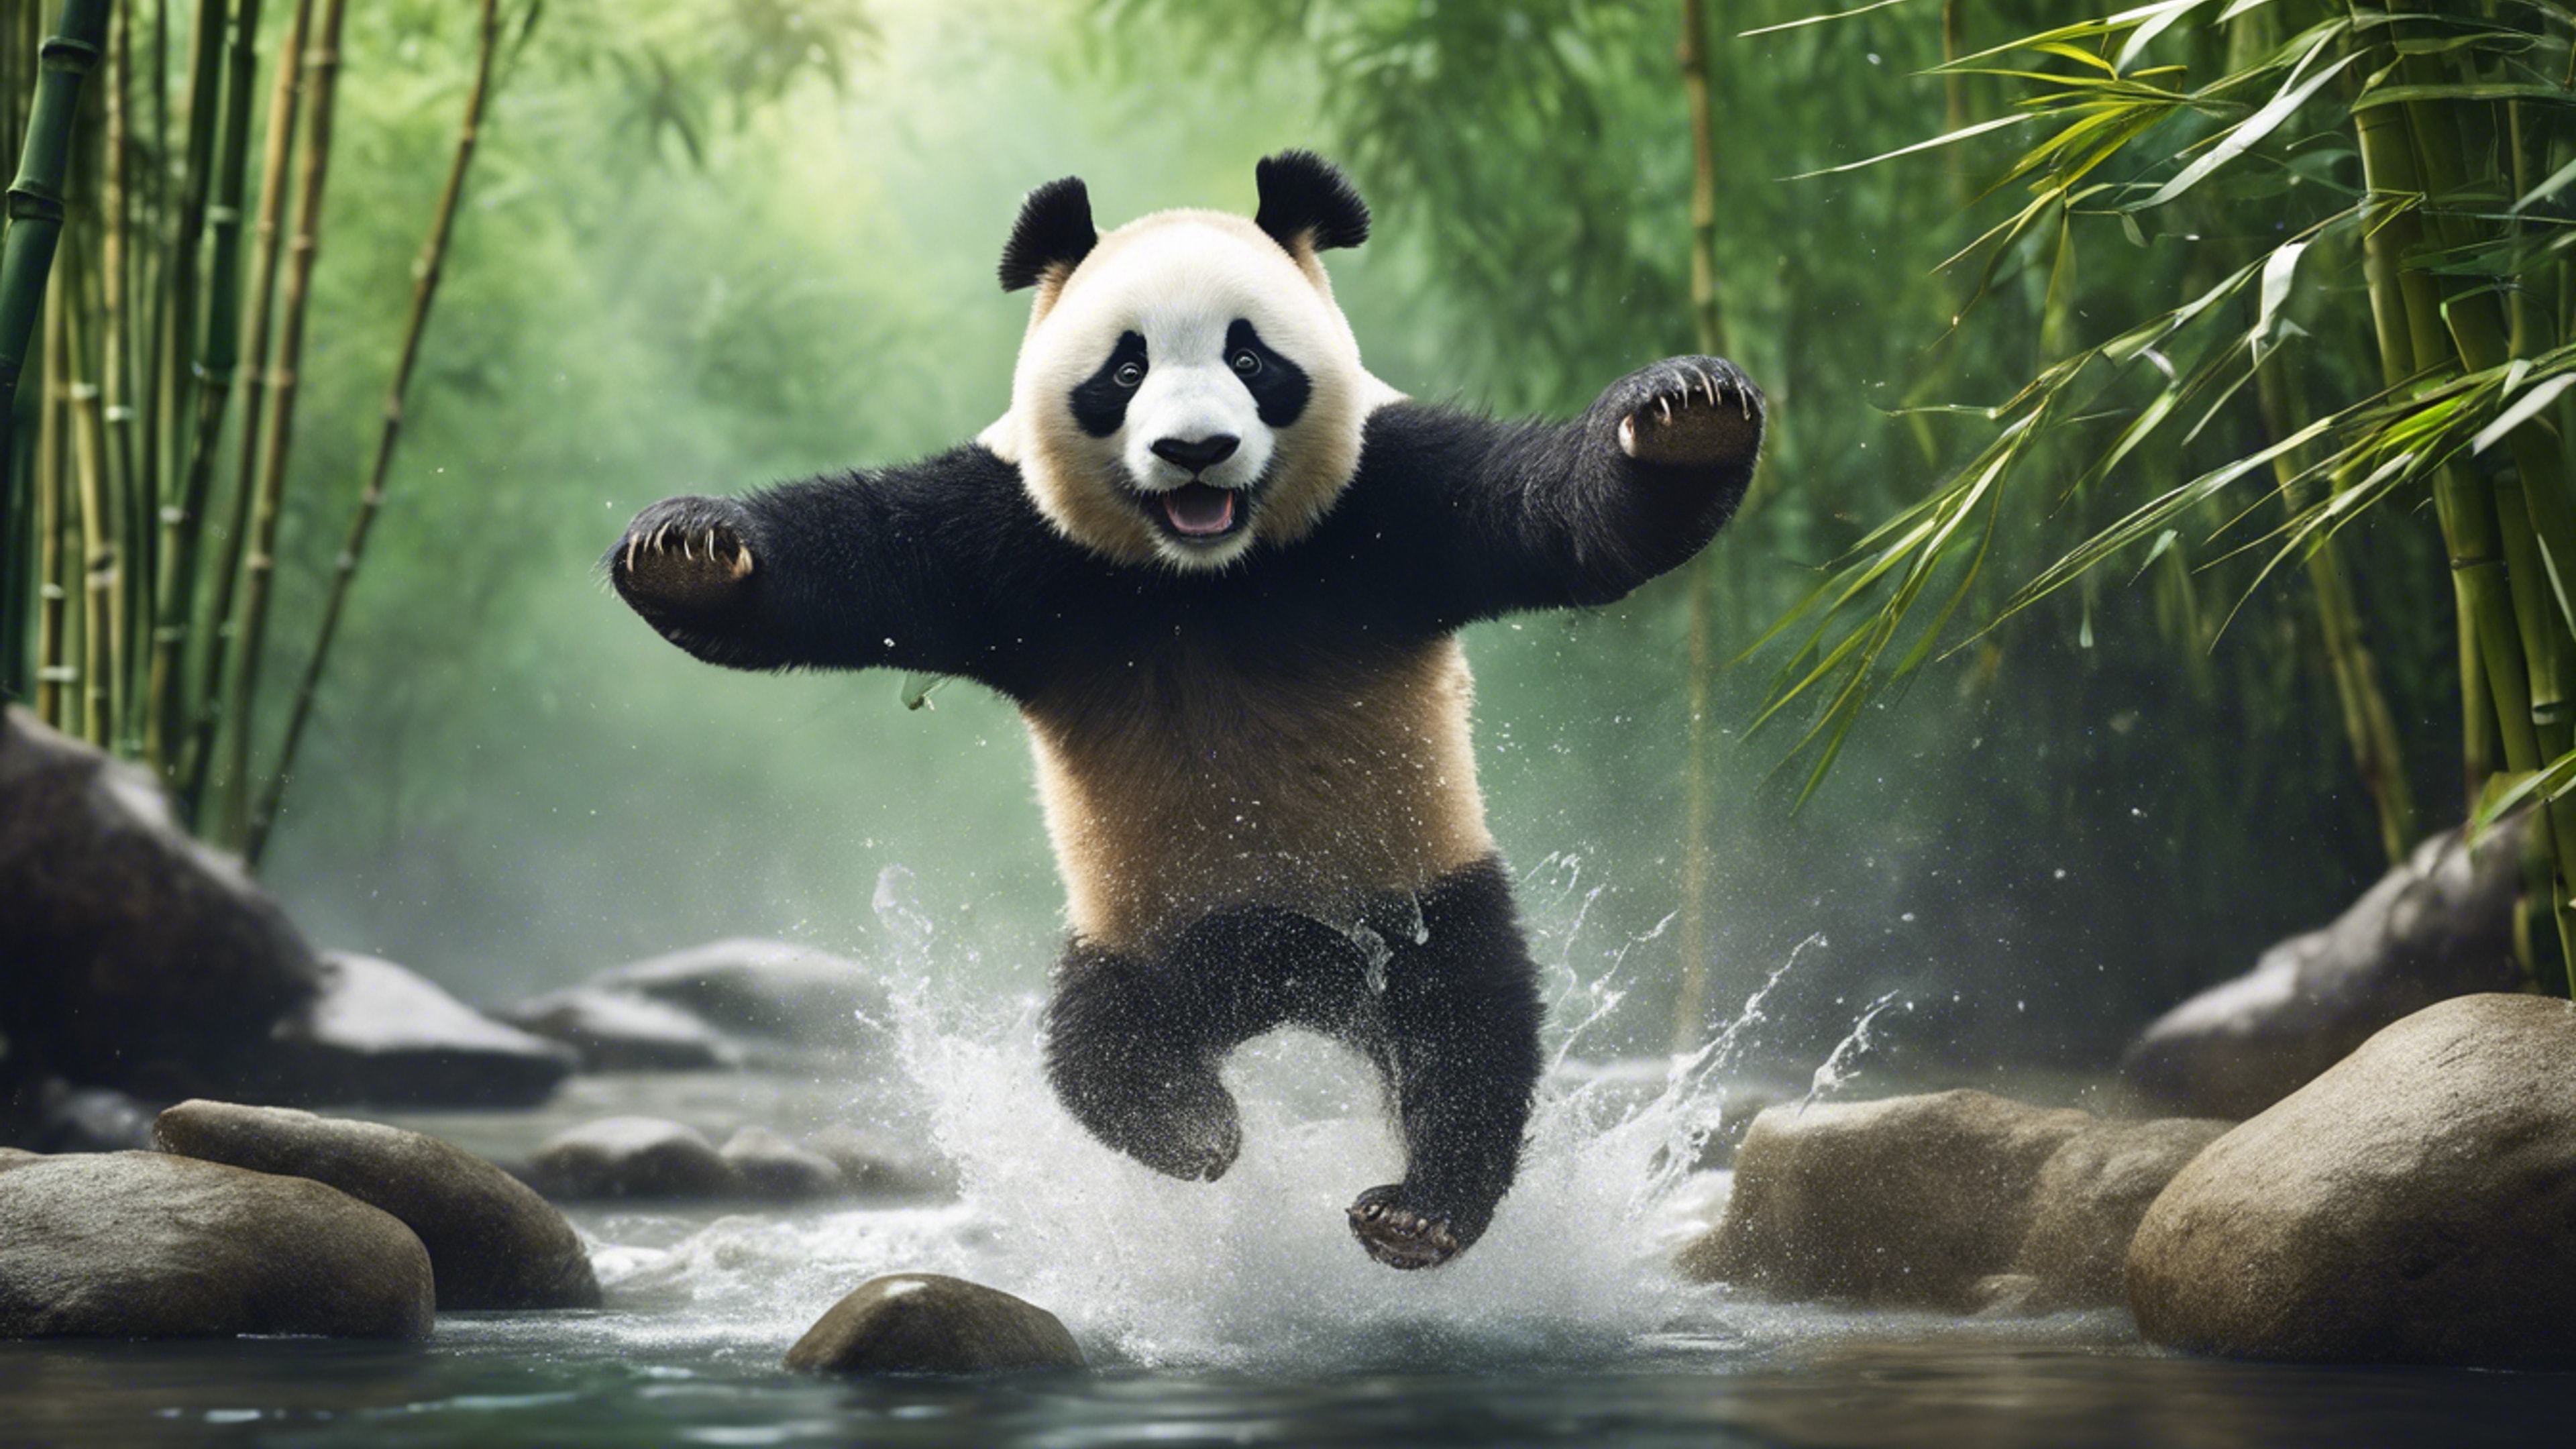 An adventurous panda leaping across a rapid creek with bamboo forests in the backdrop. Hintergrund[317eaaa1af264f04a7c3]